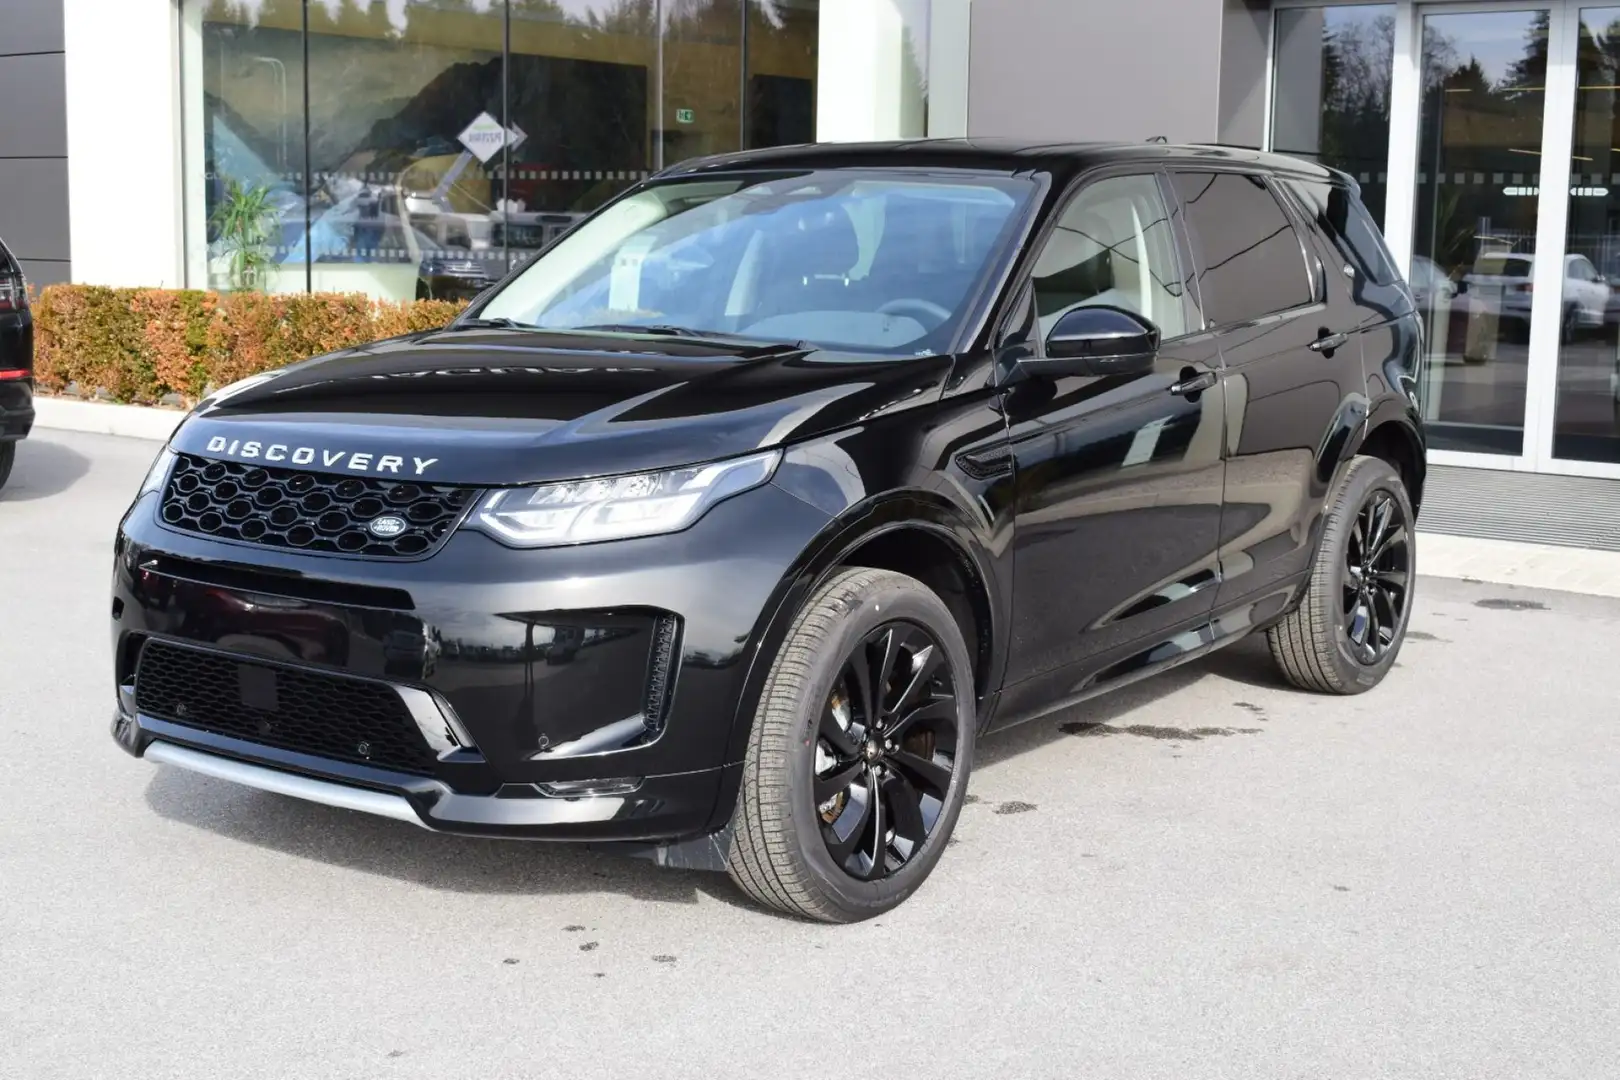 Land Rover Discovery Sport 2.0 TD4 163 CV AWD Auto S N1 Nero - 1